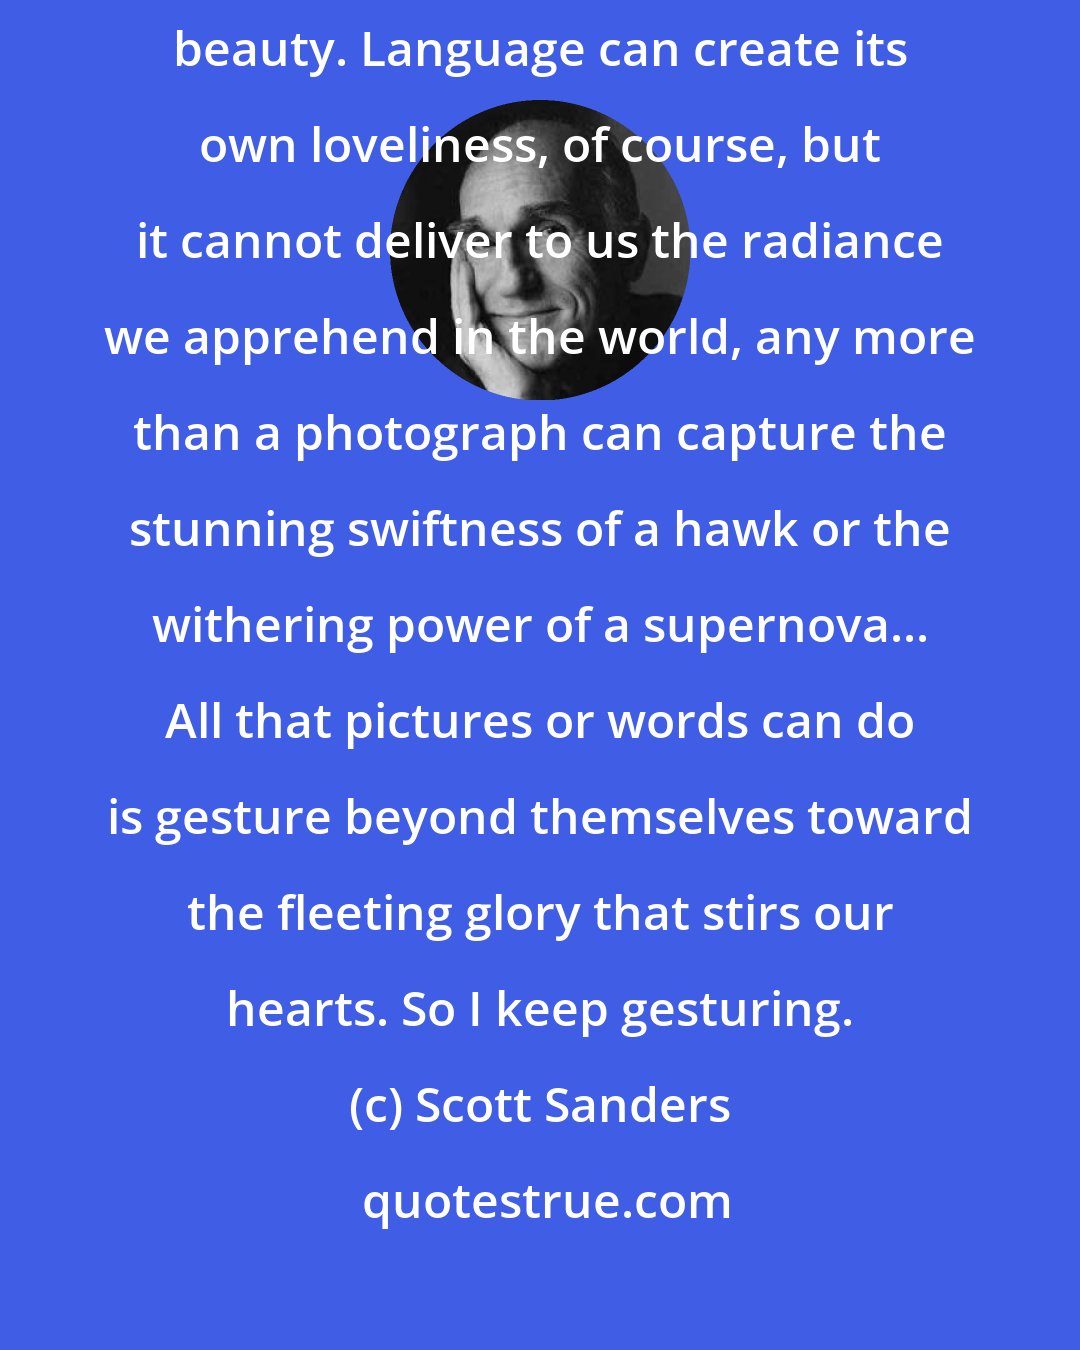 Scott Sanders: I'm never more aware of the limitations of language than when I try to describe beauty. Language can create its own loveliness, of course, but it cannot deliver to us the radiance we apprehend in the world, any more than a photograph can capture the stunning swiftness of a hawk or the withering power of a supernova... All that pictures or words can do is gesture beyond themselves toward the fleeting glory that stirs our hearts. So I keep gesturing.